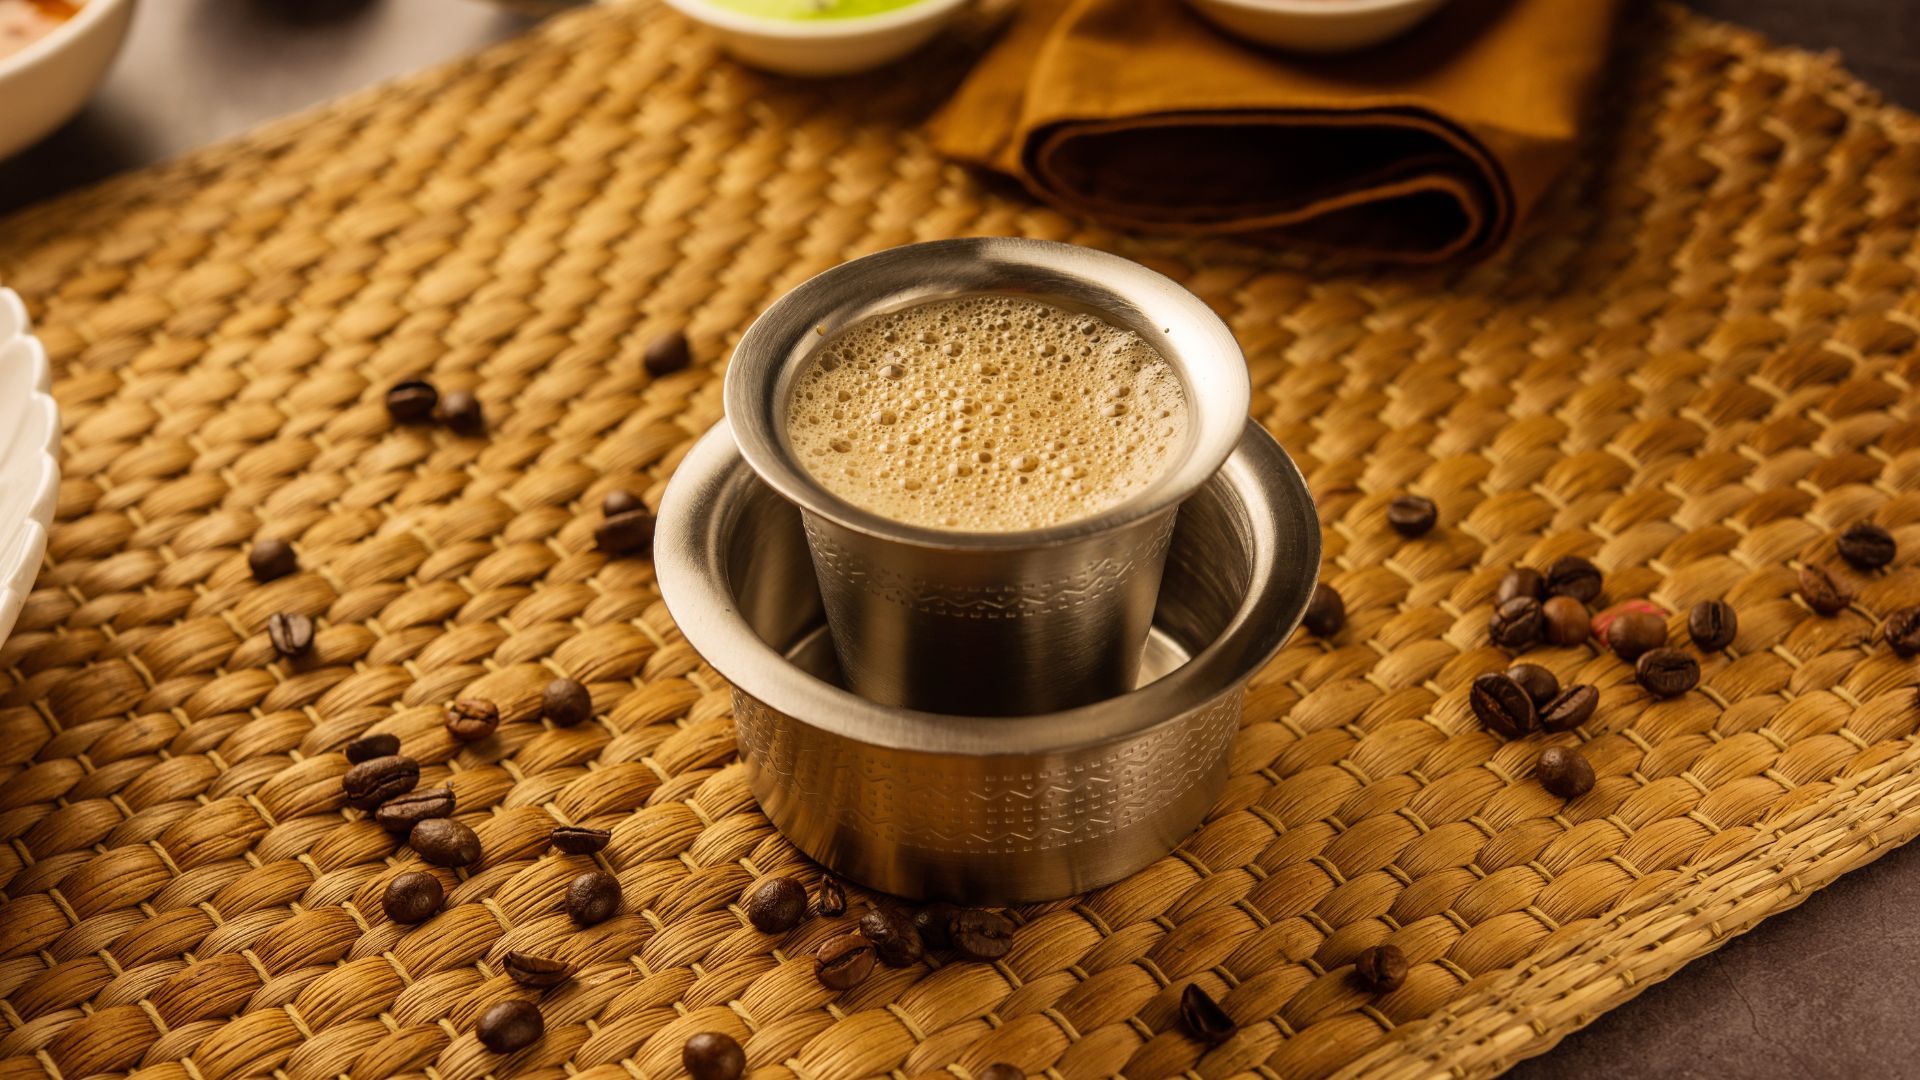 Filter Coffee, How To Make South Indian Filter Coffee At Home, Quick &  Easy Coffee Recipe